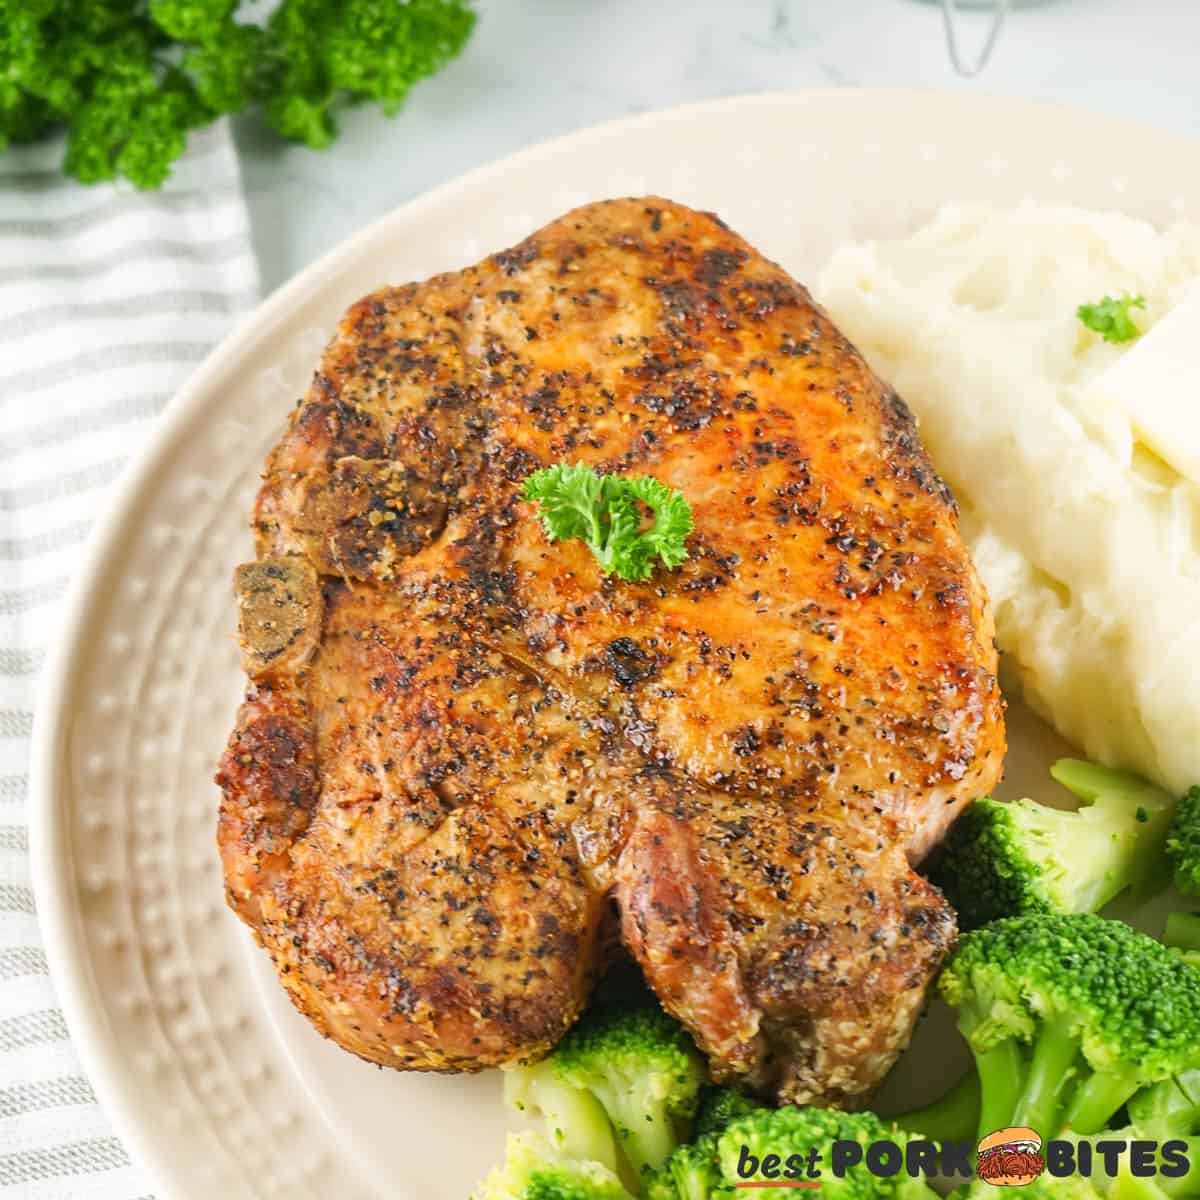 grilled pork chop on a plate with broccoli and mashed potatoes